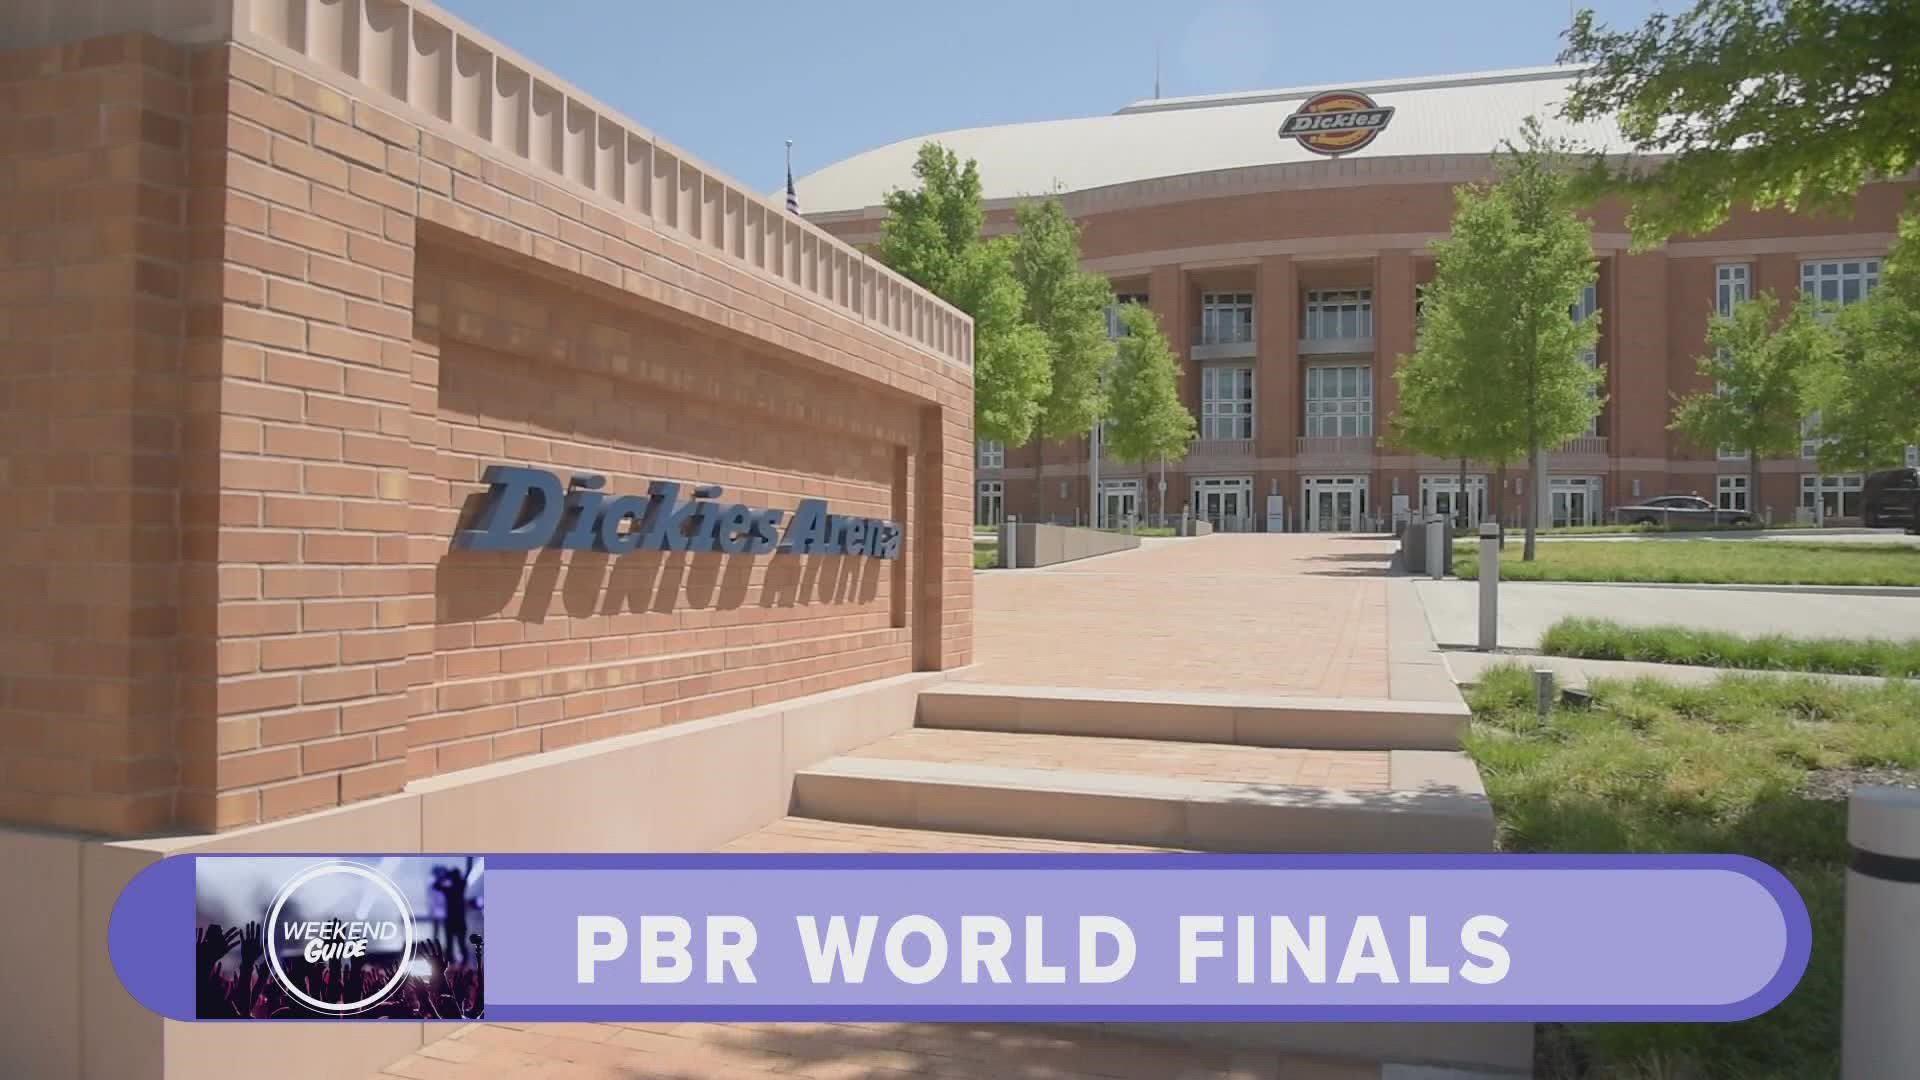 From the PBR World Finals to the AT&T Byron Nelson, there's a little something for everyone happening in Dallas-Fort Worth this weekend.